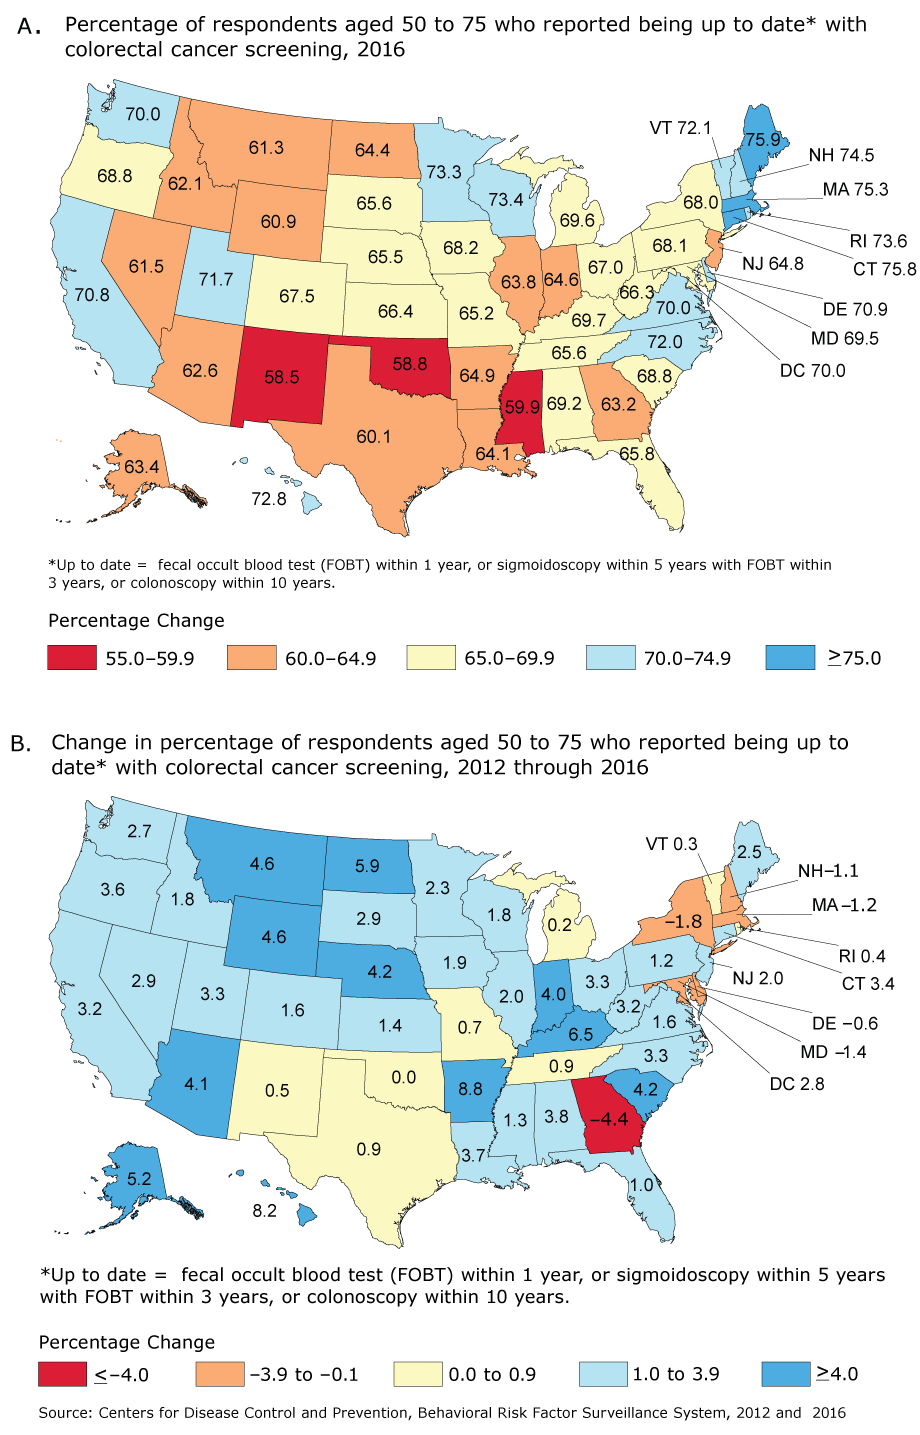 Progress toward increased use of colorectal cancer (CRC) screening tests, by state. A. Percentage of respondents aged 50 to 75 who reported being up to date with CRC screening in the 2016 Behavioral Risk Factor Surveillance System (1). The percentage up to date for the United States overall was 67.3%. B. The absolute change in percentage of respondents aged 50 to 75 who reported being up to date with CRC screening from 2012 through 2016, by state, Behavioral Risk Factor Surveillance System, 2012 (2), 2016 (1). Up to date is defined as having had a fecal occult blood test (FOBT) within the past year, sigmoidoscopy within the past 5 years with FOBT within the past 3 years, or colonoscopy within the past 10 years. Source: CDC Behavioral Risk Factor Surveillance System (BRFSS), BRFSS, 2012 and 2016 (1–2).